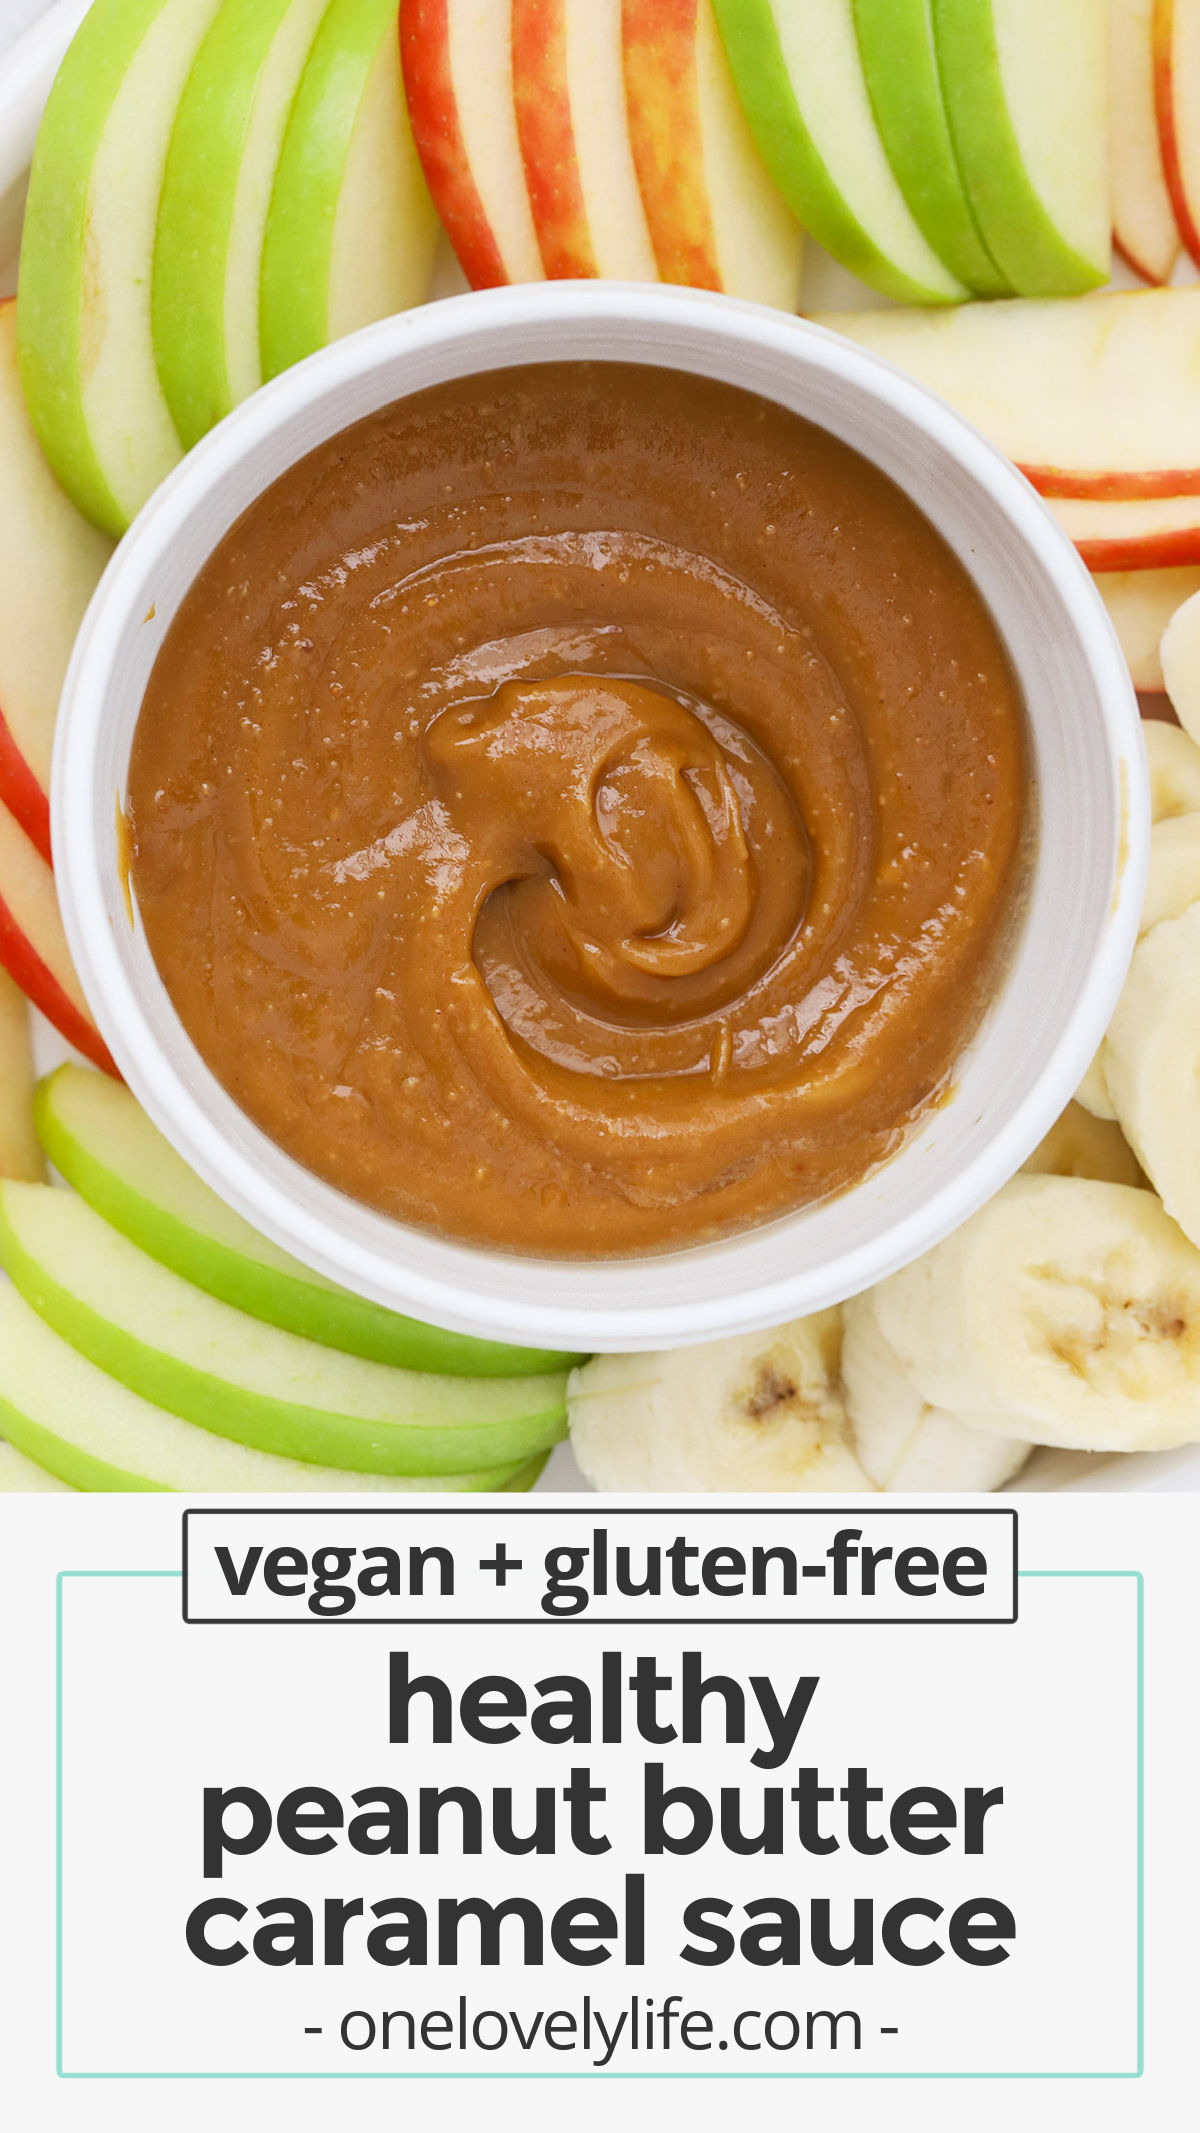 Healthy Peanut Butter Caramel Apple Dip - This healthy caramel dip is perfect for apples, bananas, and more! (Vegan, gluten-free, dairy-free) // peanut butter apple dip // healthy caramel apple dip // healthy caramel dip // vegan caramel dip // vegan fruit dip // healthy fruit dip // peanut butter fruit dip